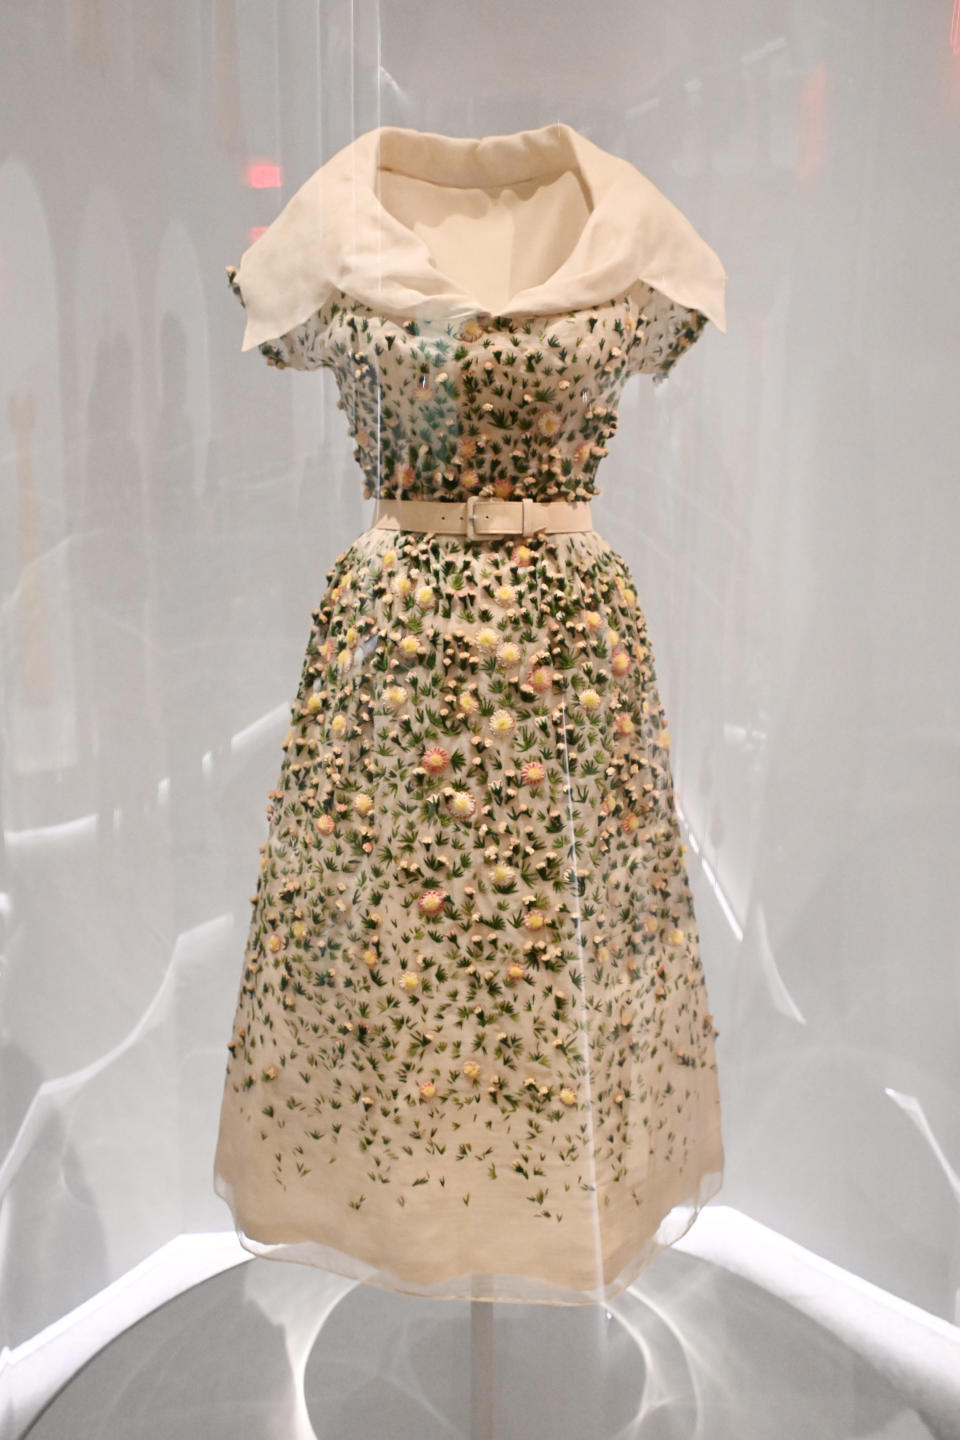 Vintage-style dress with floral embellishments on display